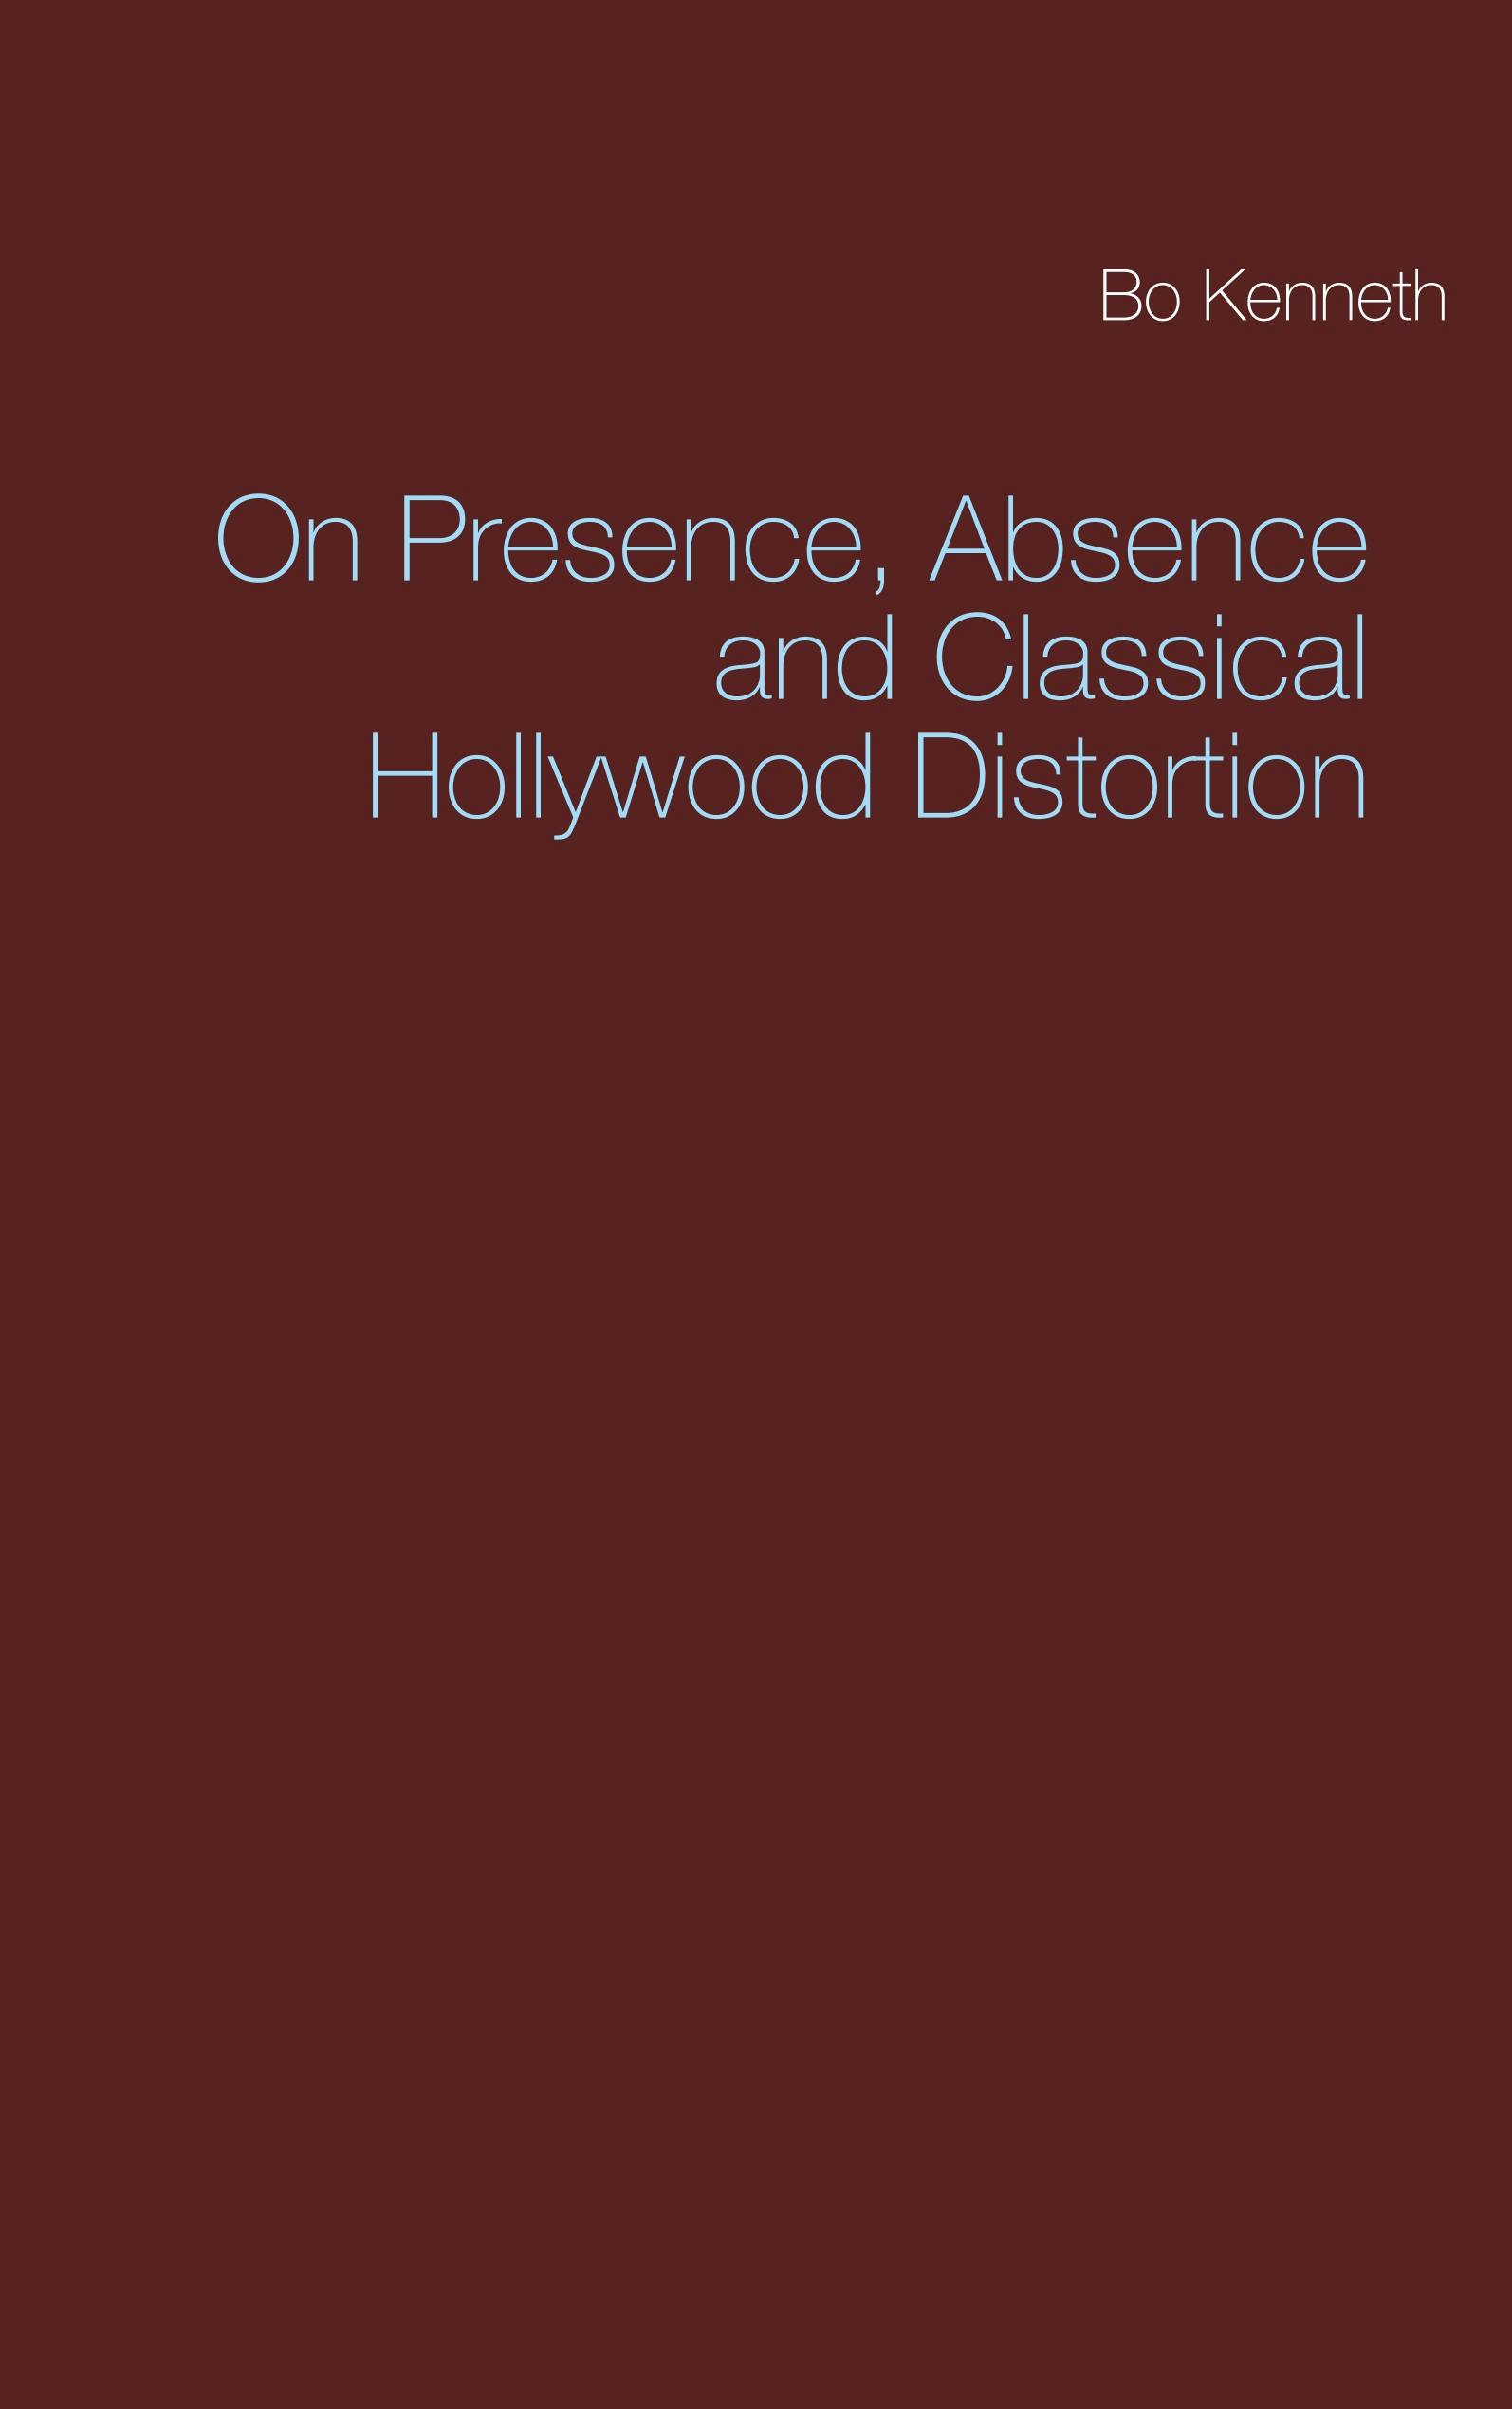 On Presence, Absence and Classical Hollywood Distortion - Bo Kenneth